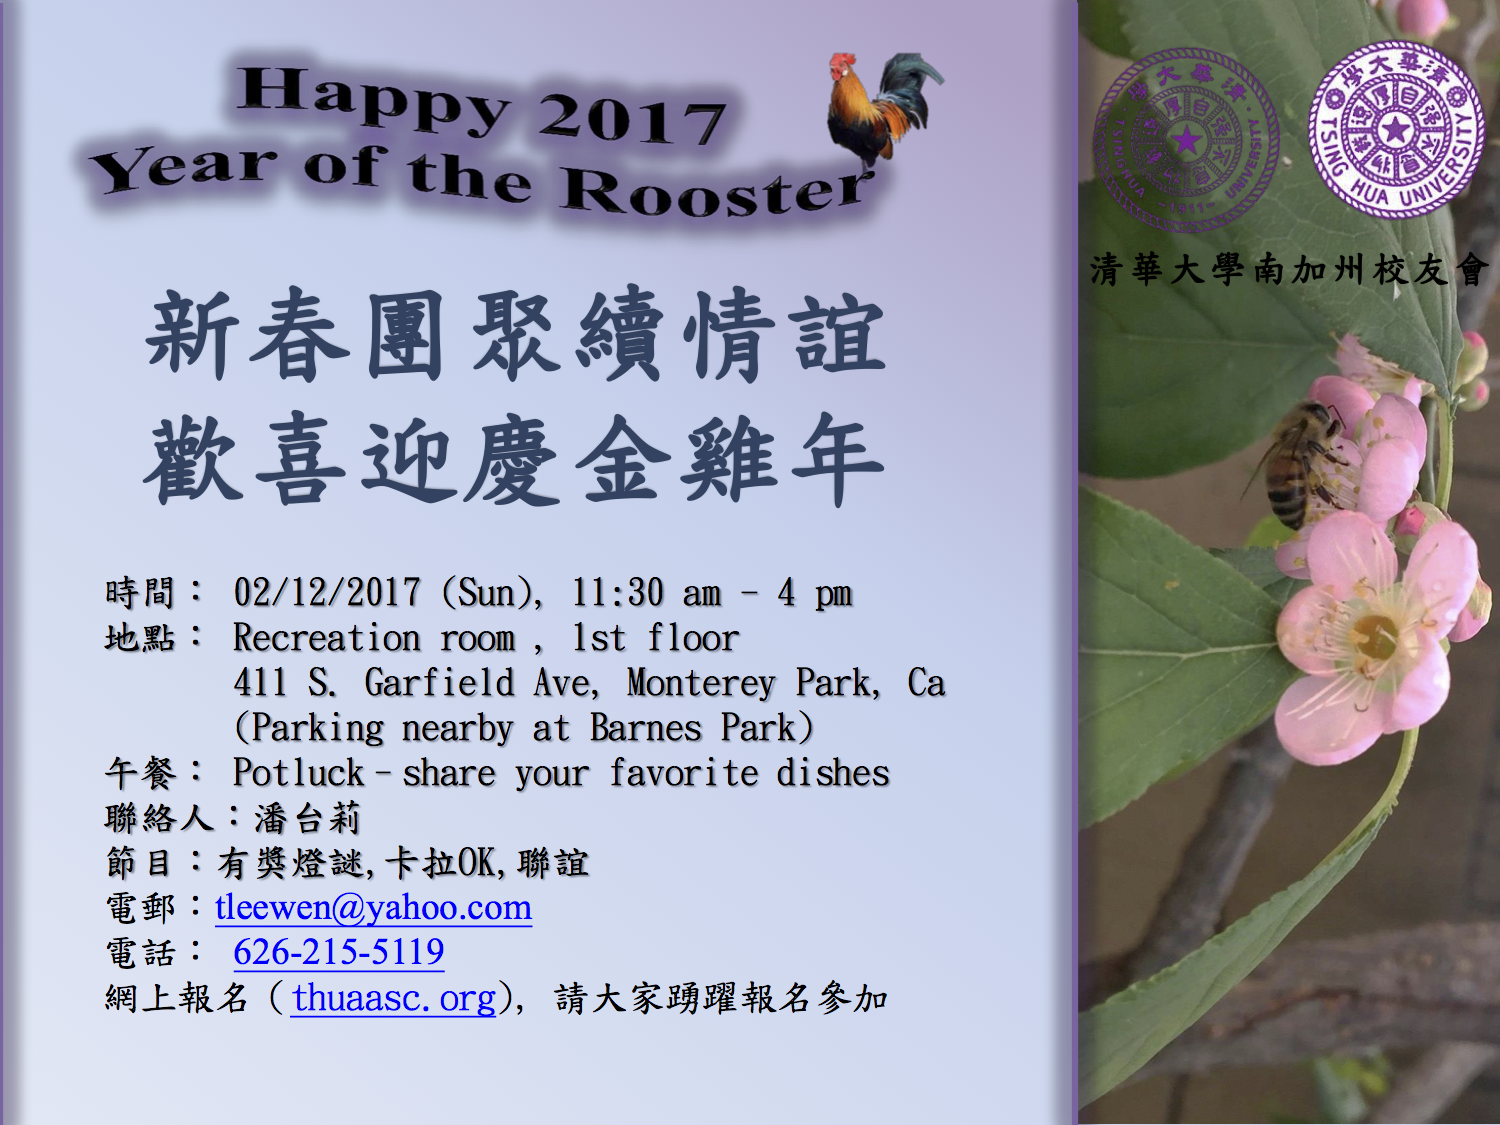 happy-2017-year-of-the-rooster-rev-a